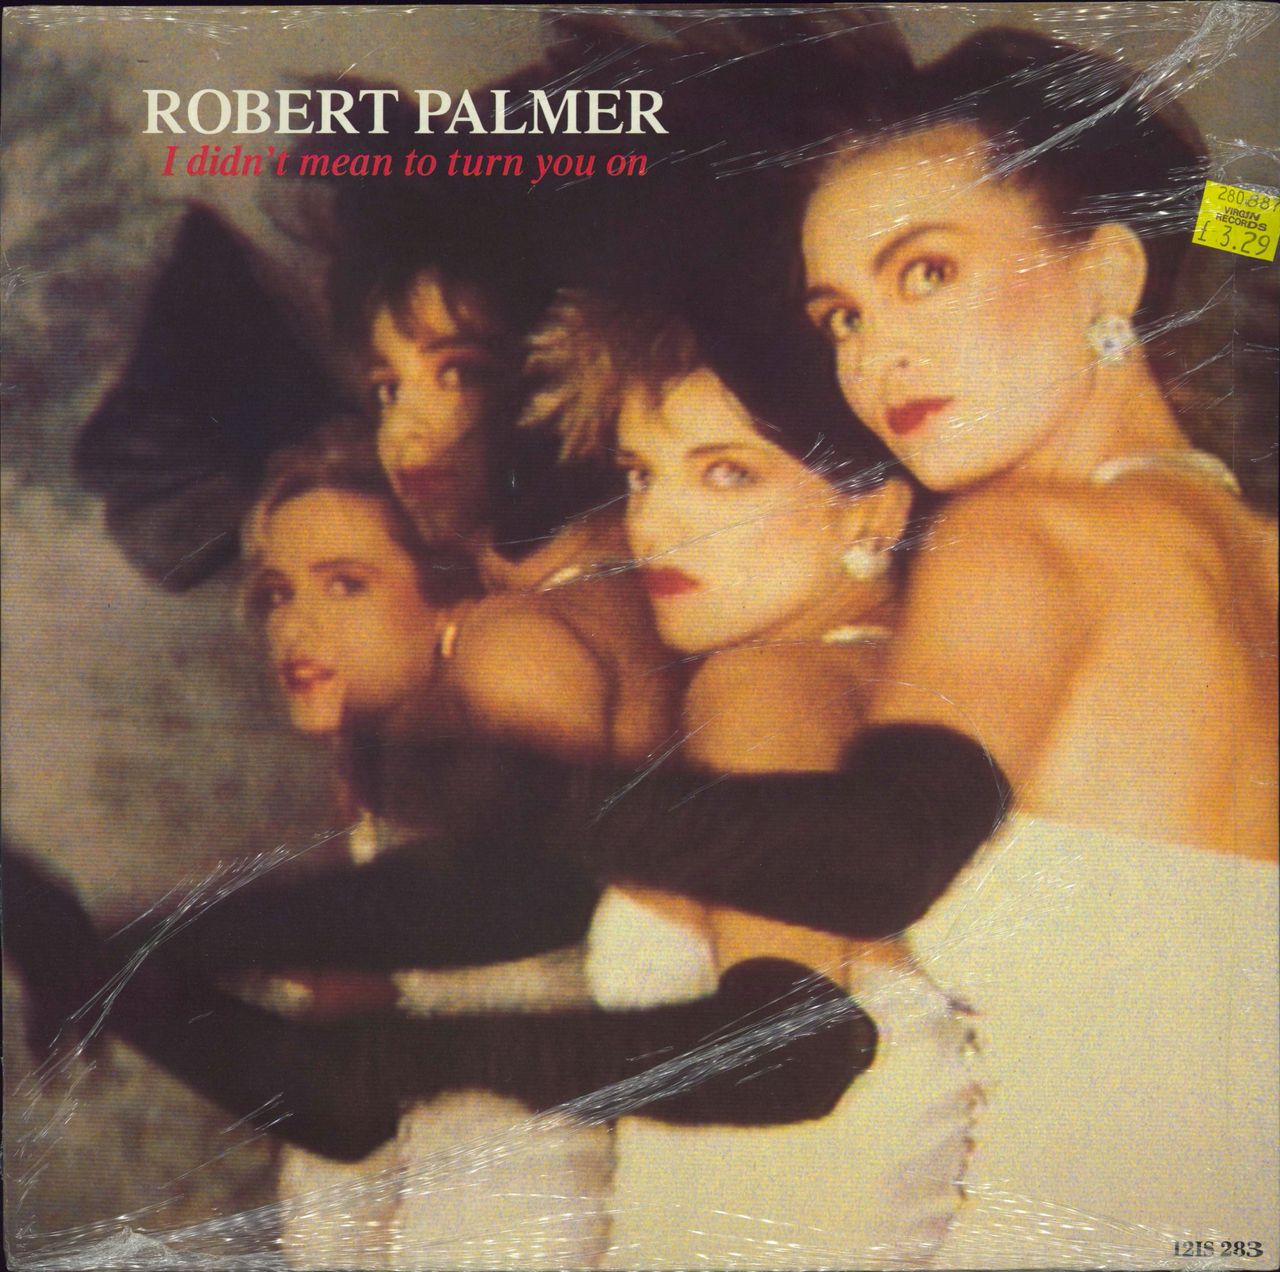 Robert Palmer I Didn't Mean To Turn You On - Shrink UK 12" vinyl single (12 inch record / Maxi-single) 12IS283